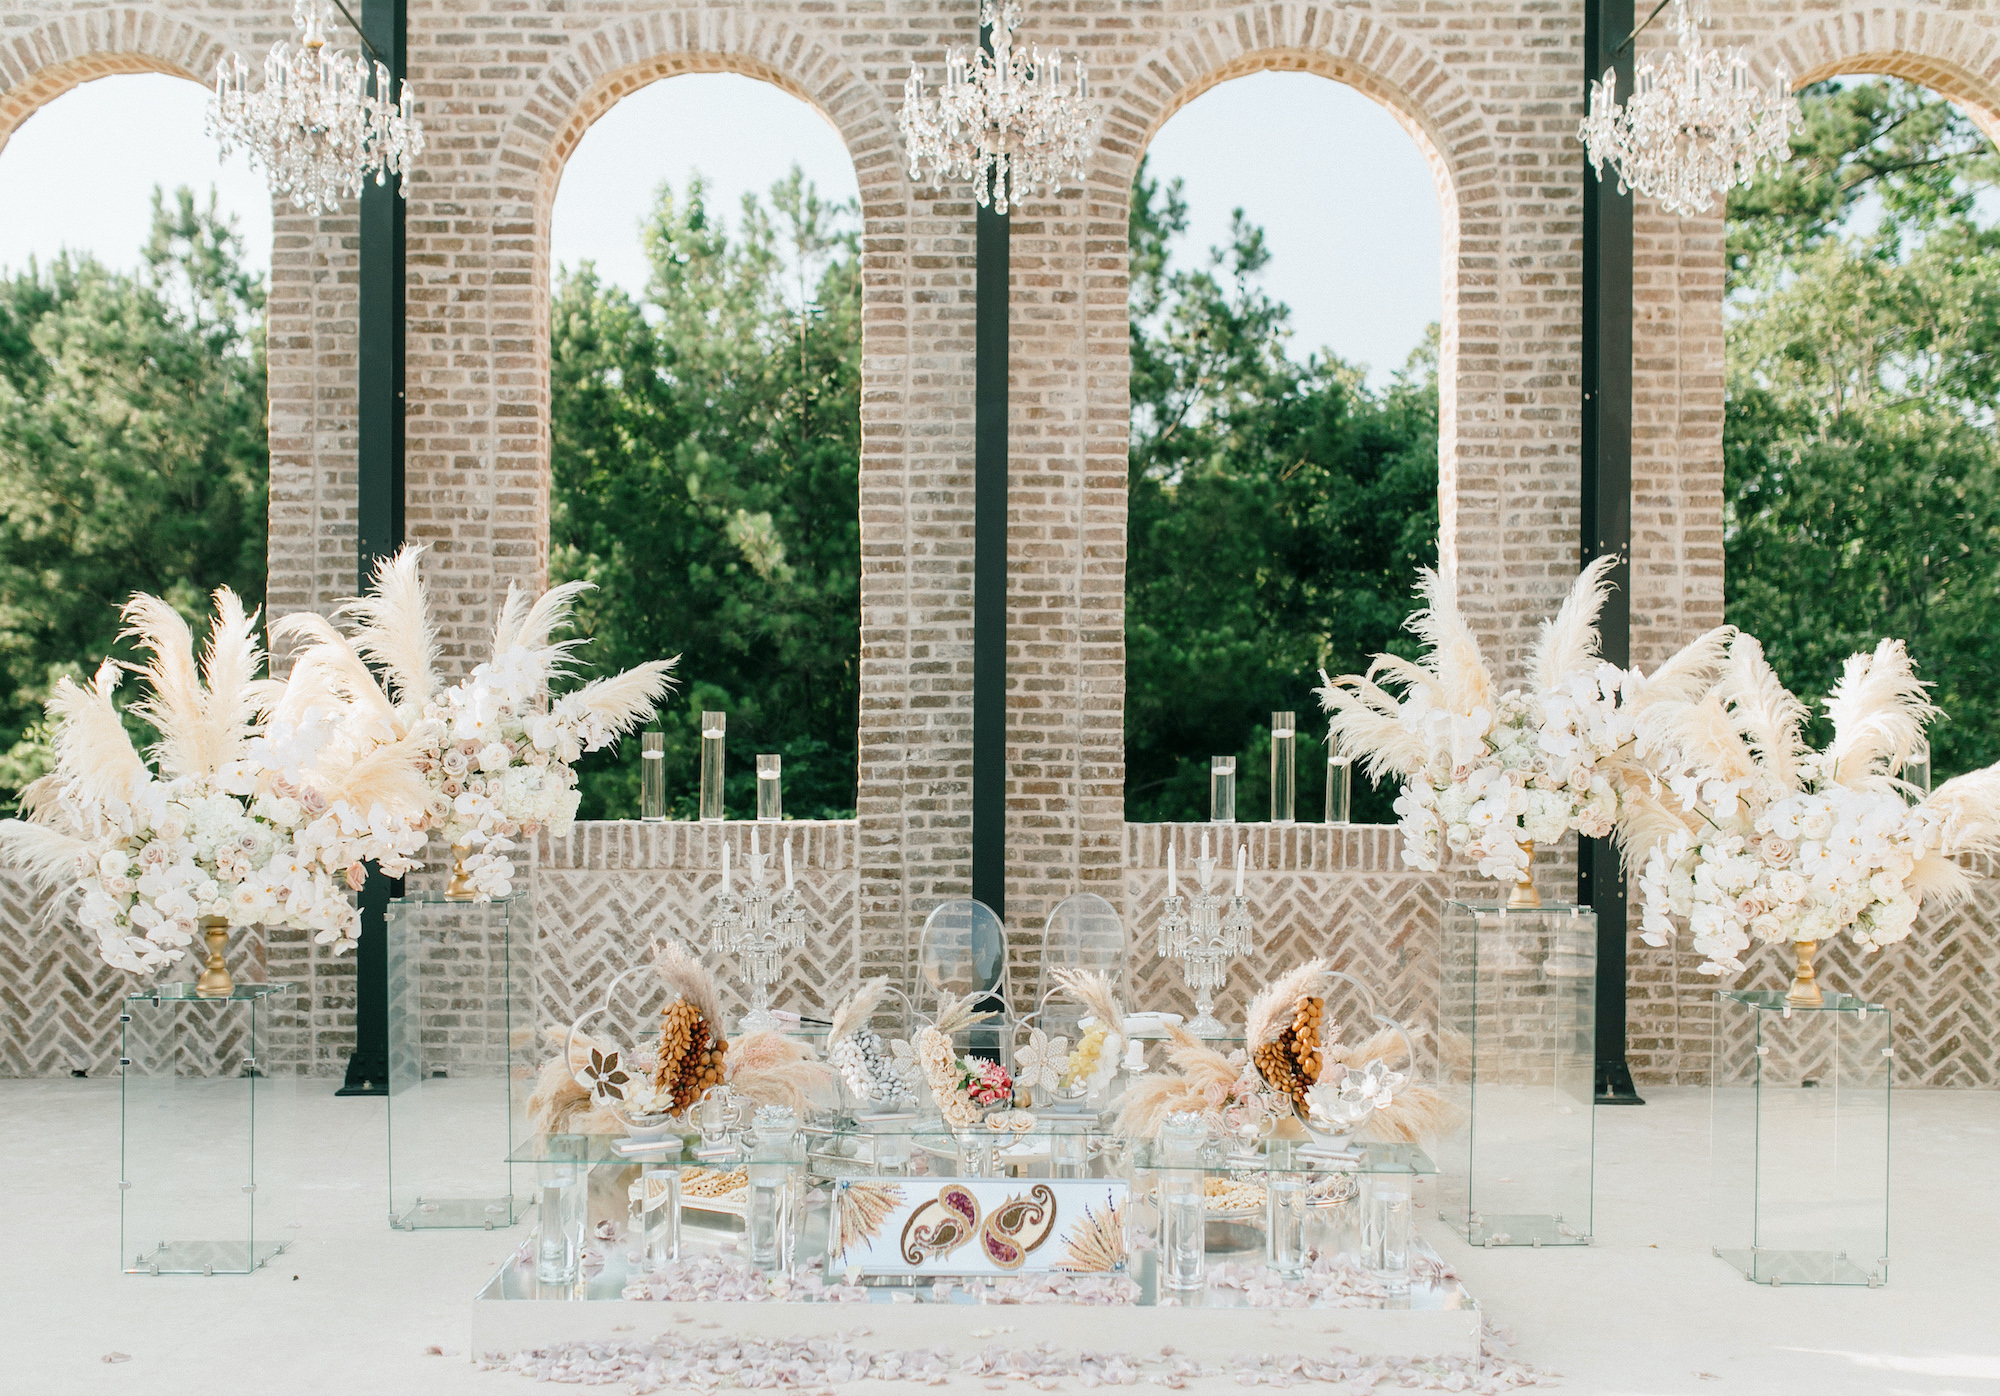 A Persian wedding ceremony is set up outside at the wedding venue Iron Manor in Montgomery, TX.